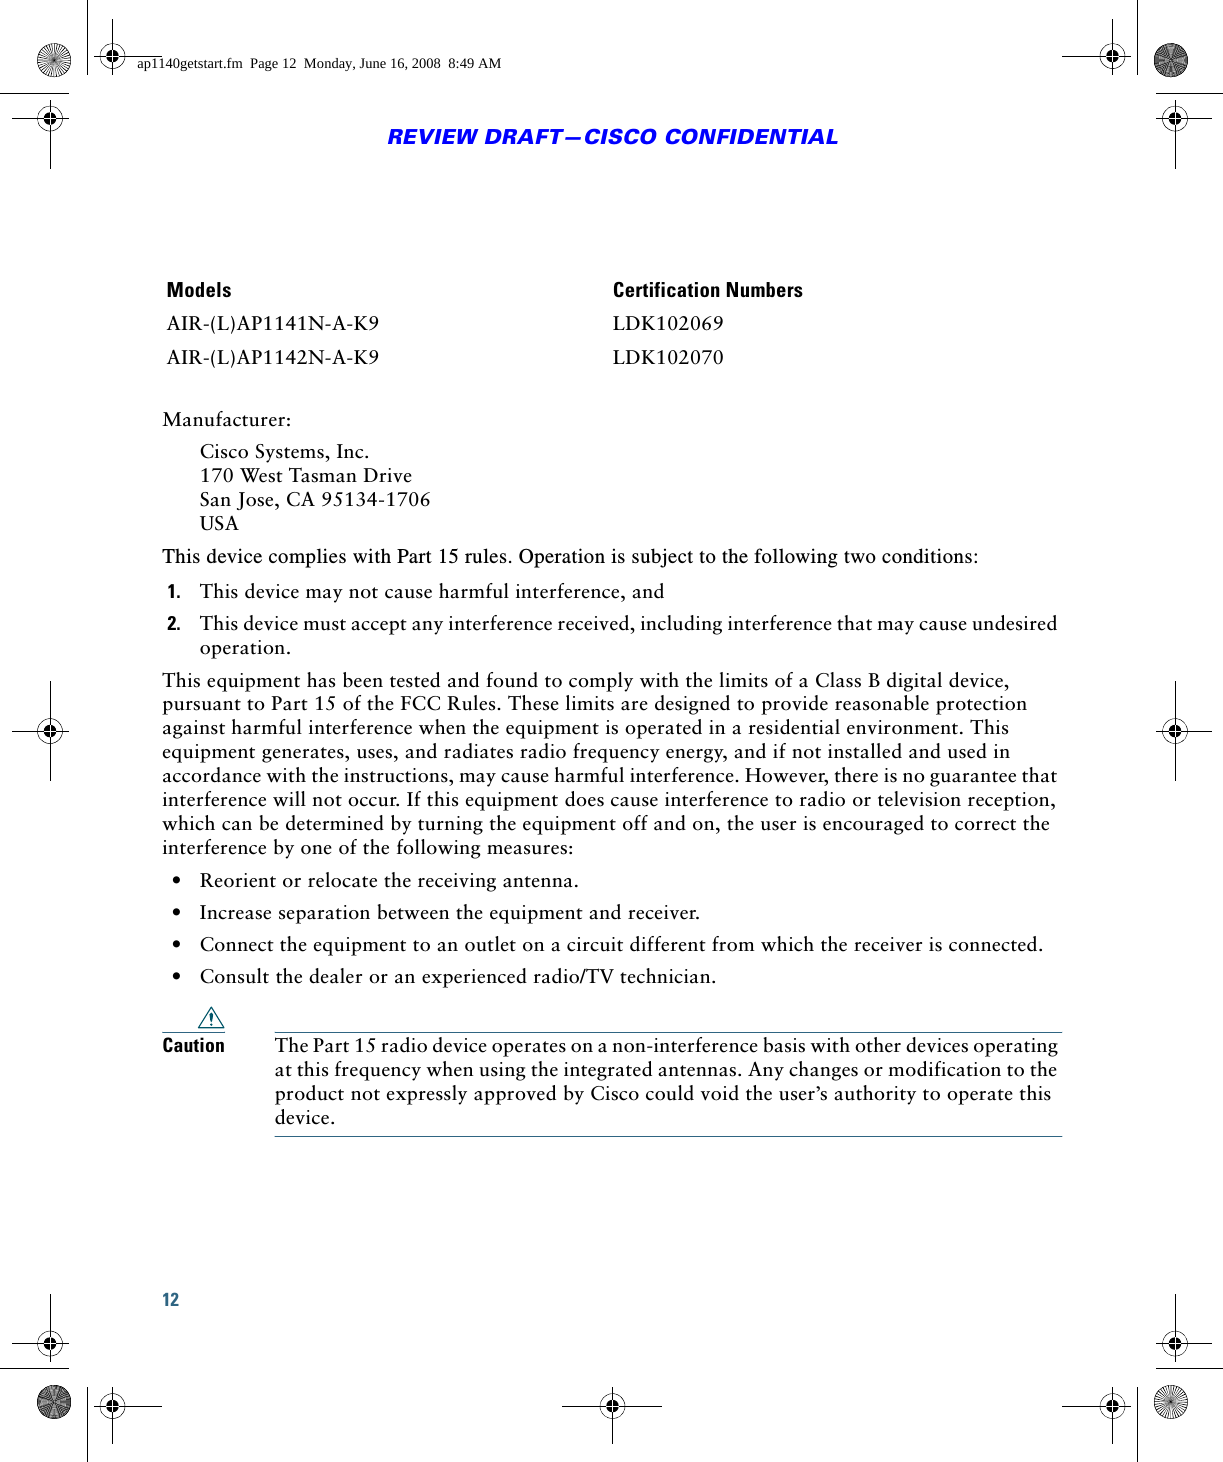 12REVIEW DRAFT—CISCO CONFIDENTIALManufacturer:Cisco Systems, Inc. 170 West Tasman Drive San Jose, CA 95134-1706 USAThis device complies with Part 15 rules. Operation is subject to the following two conditions:1. This device may not cause harmful interference, and2. This device must accept any interference received, including interference that may cause undesired operation.This equipment has been tested and found to comply with the limits of a Class B digital device, pursuant to Part 15 of the FCC Rules. These limits are designed to provide reasonable protection against harmful interference when the equipment is operated in a residential environment. This equipment generates, uses, and radiates radio frequency energy, and if not installed and used in accordance with the instructions, may cause harmful interference. However, there is no guarantee that interference will not occur. If this equipment does cause interference to radio or television reception, which can be determined by turning the equipment off and on, the user is encouraged to correct the interference by one of the following measures:  • Reorient or relocate the receiving antenna.  • Increase separation between the equipment and receiver.  • Connect the equipment to an outlet on a circuit different from which the receiver is connected.  • Consult the dealer or an experienced radio/TV technician.Caution The Part 15 radio device operates on a non-interference basis with other devices operating at this frequency when using the integrated antennas. Any changes or modification to the product not expressly approved by Cisco could void the user’s authority to operate this device.Models Certification NumbersAIR-(L)AP1141N-A-K9 LDK102069AIR-(L)AP1142N-A-K9 LDK102070ap1140getstart.fm  Page 12  Monday, June 16, 2008  8:49 AM